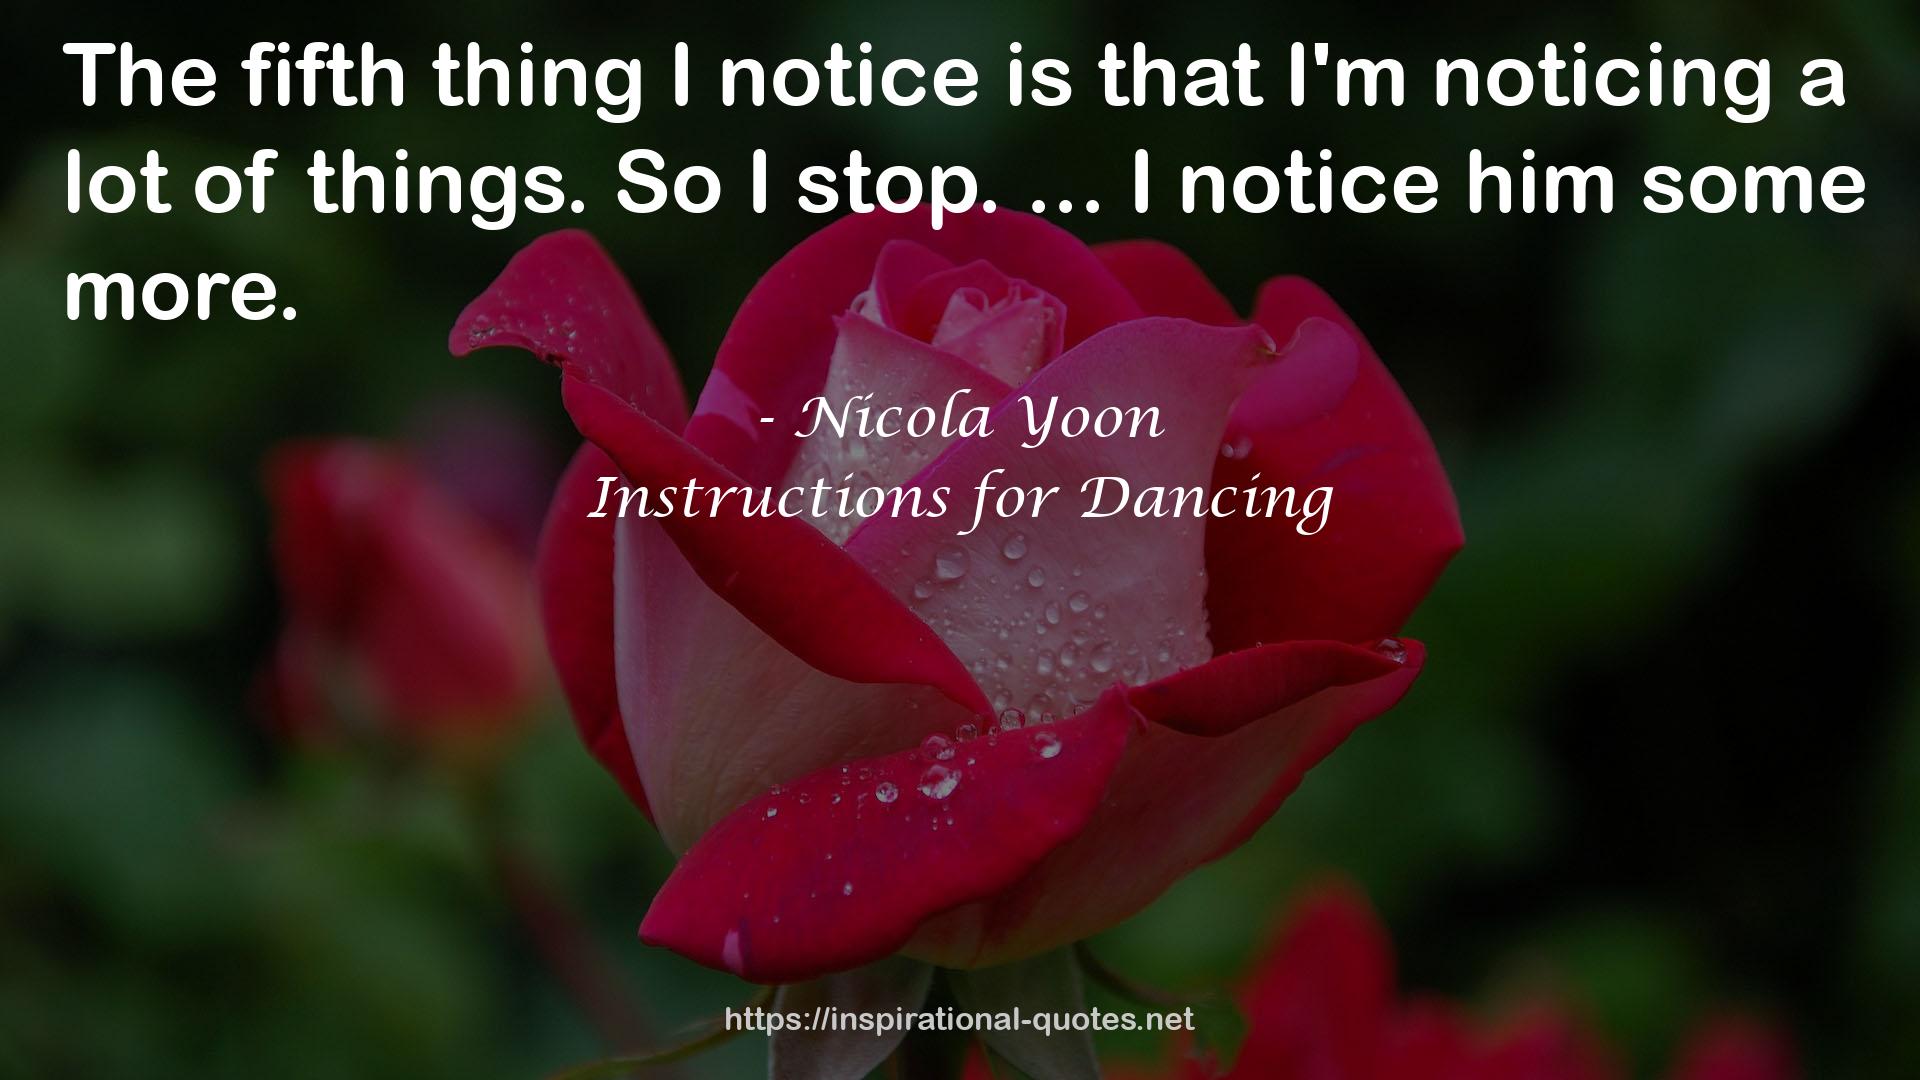 Instructions for Dancing QUOTES